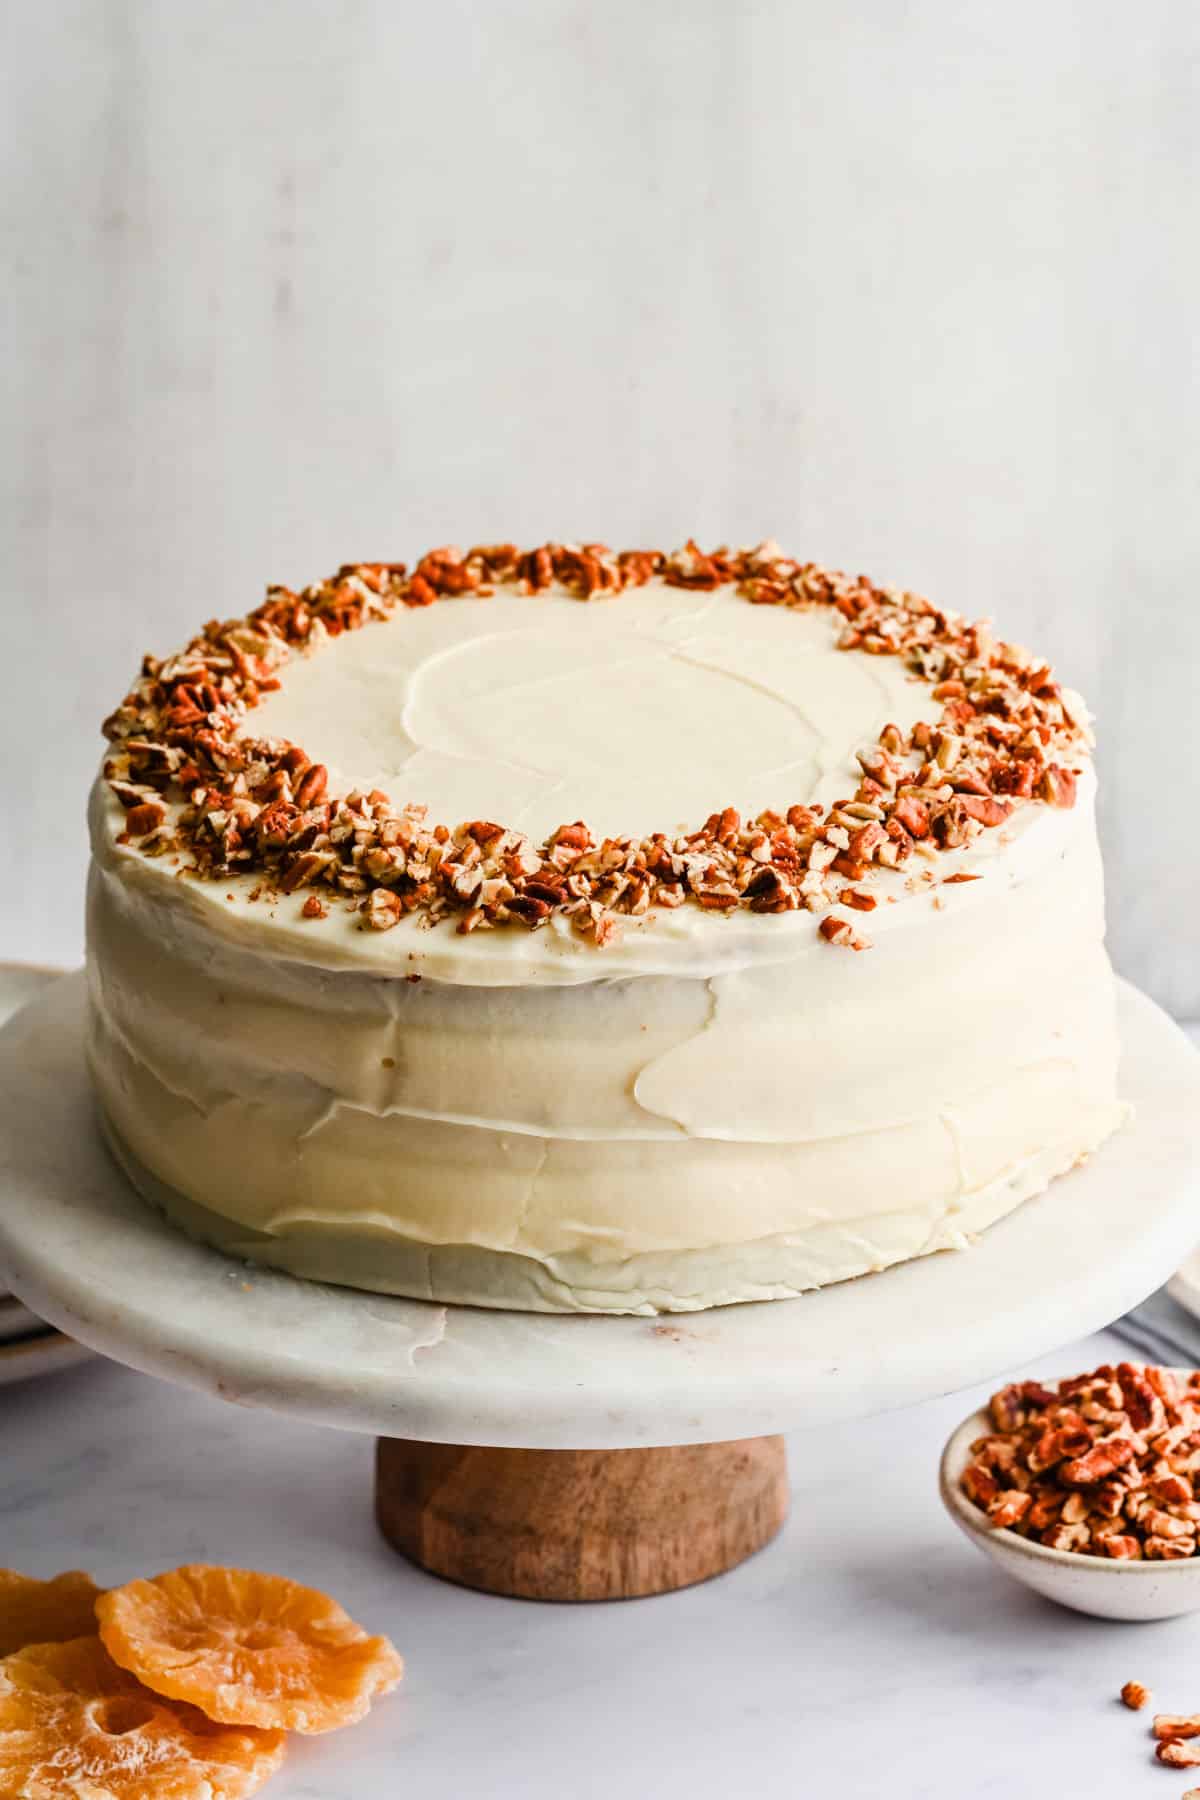 Hummingbird cake topped with chopped pecans on a marble cake stand.